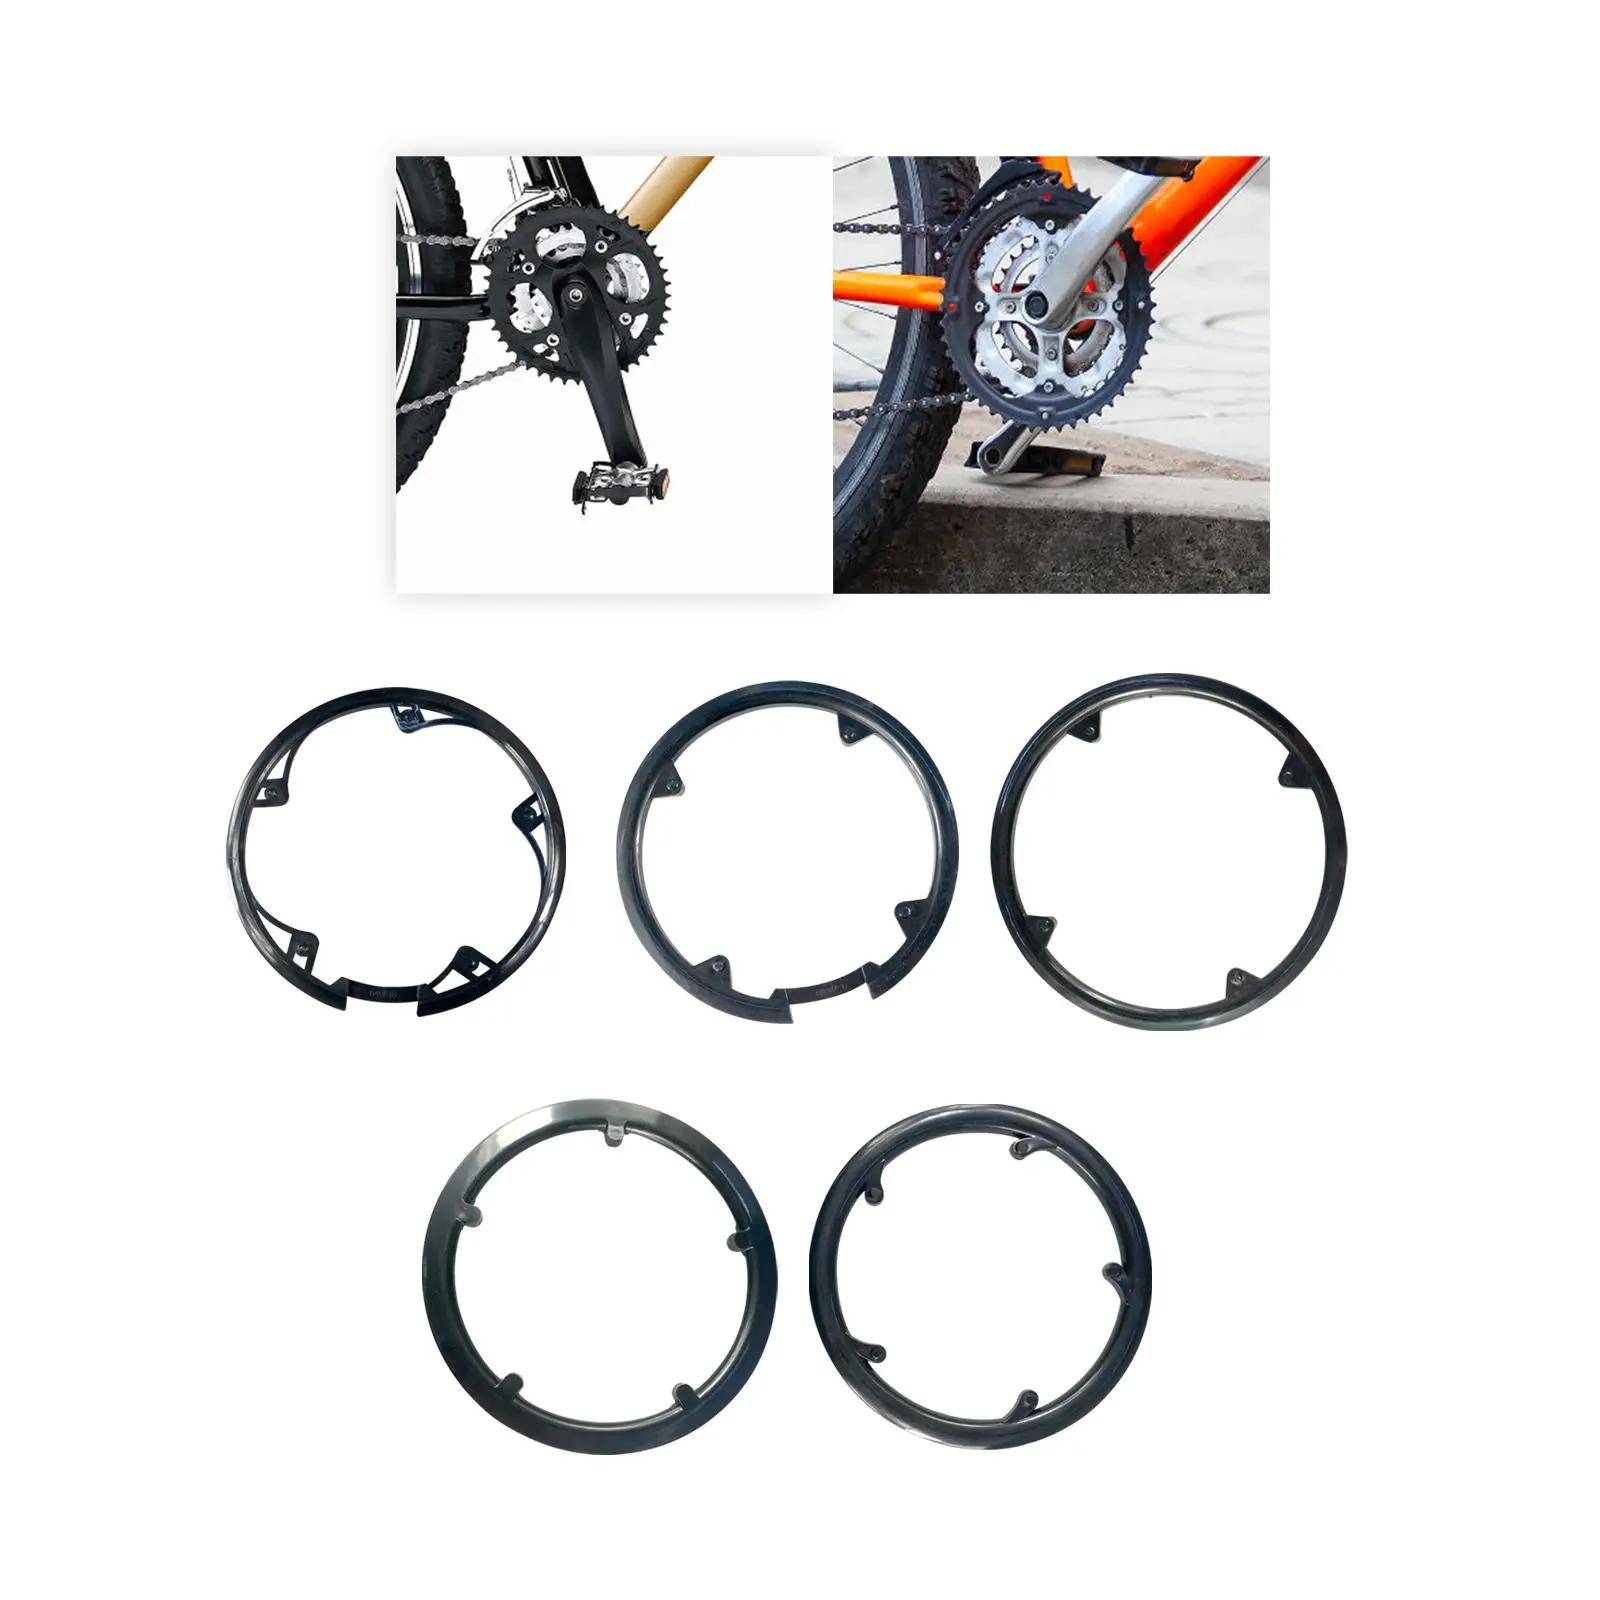 Bike Chain Wheel Protector for Bicycle Chainring Sprockets MTB Mountain Bike